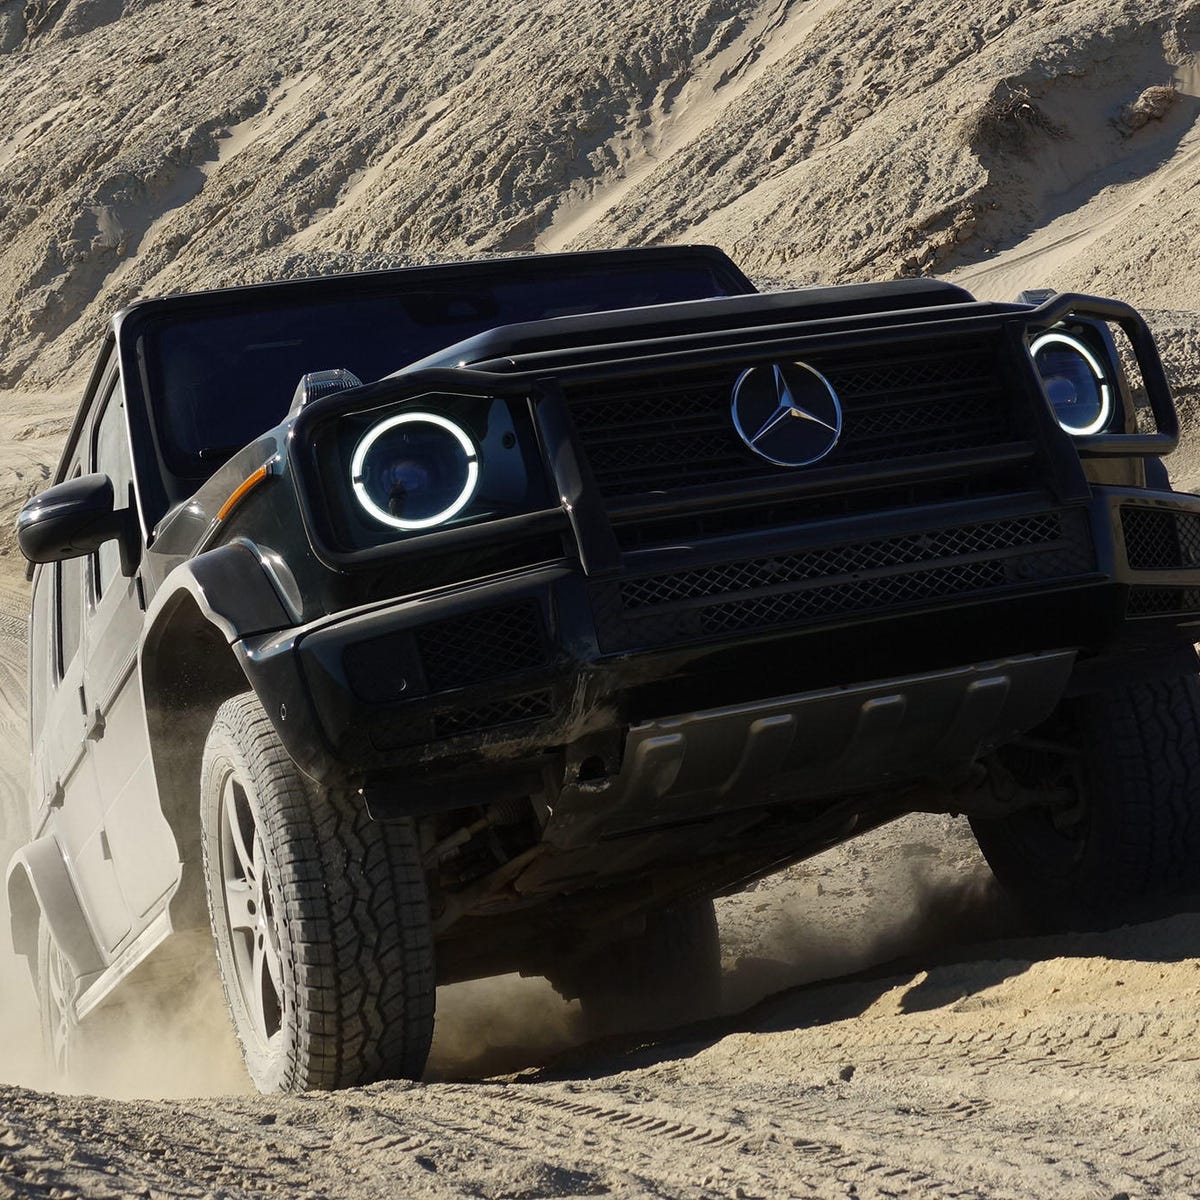 The 2019 Mercedes-Benz G-Class is a total off-road champ - CNET